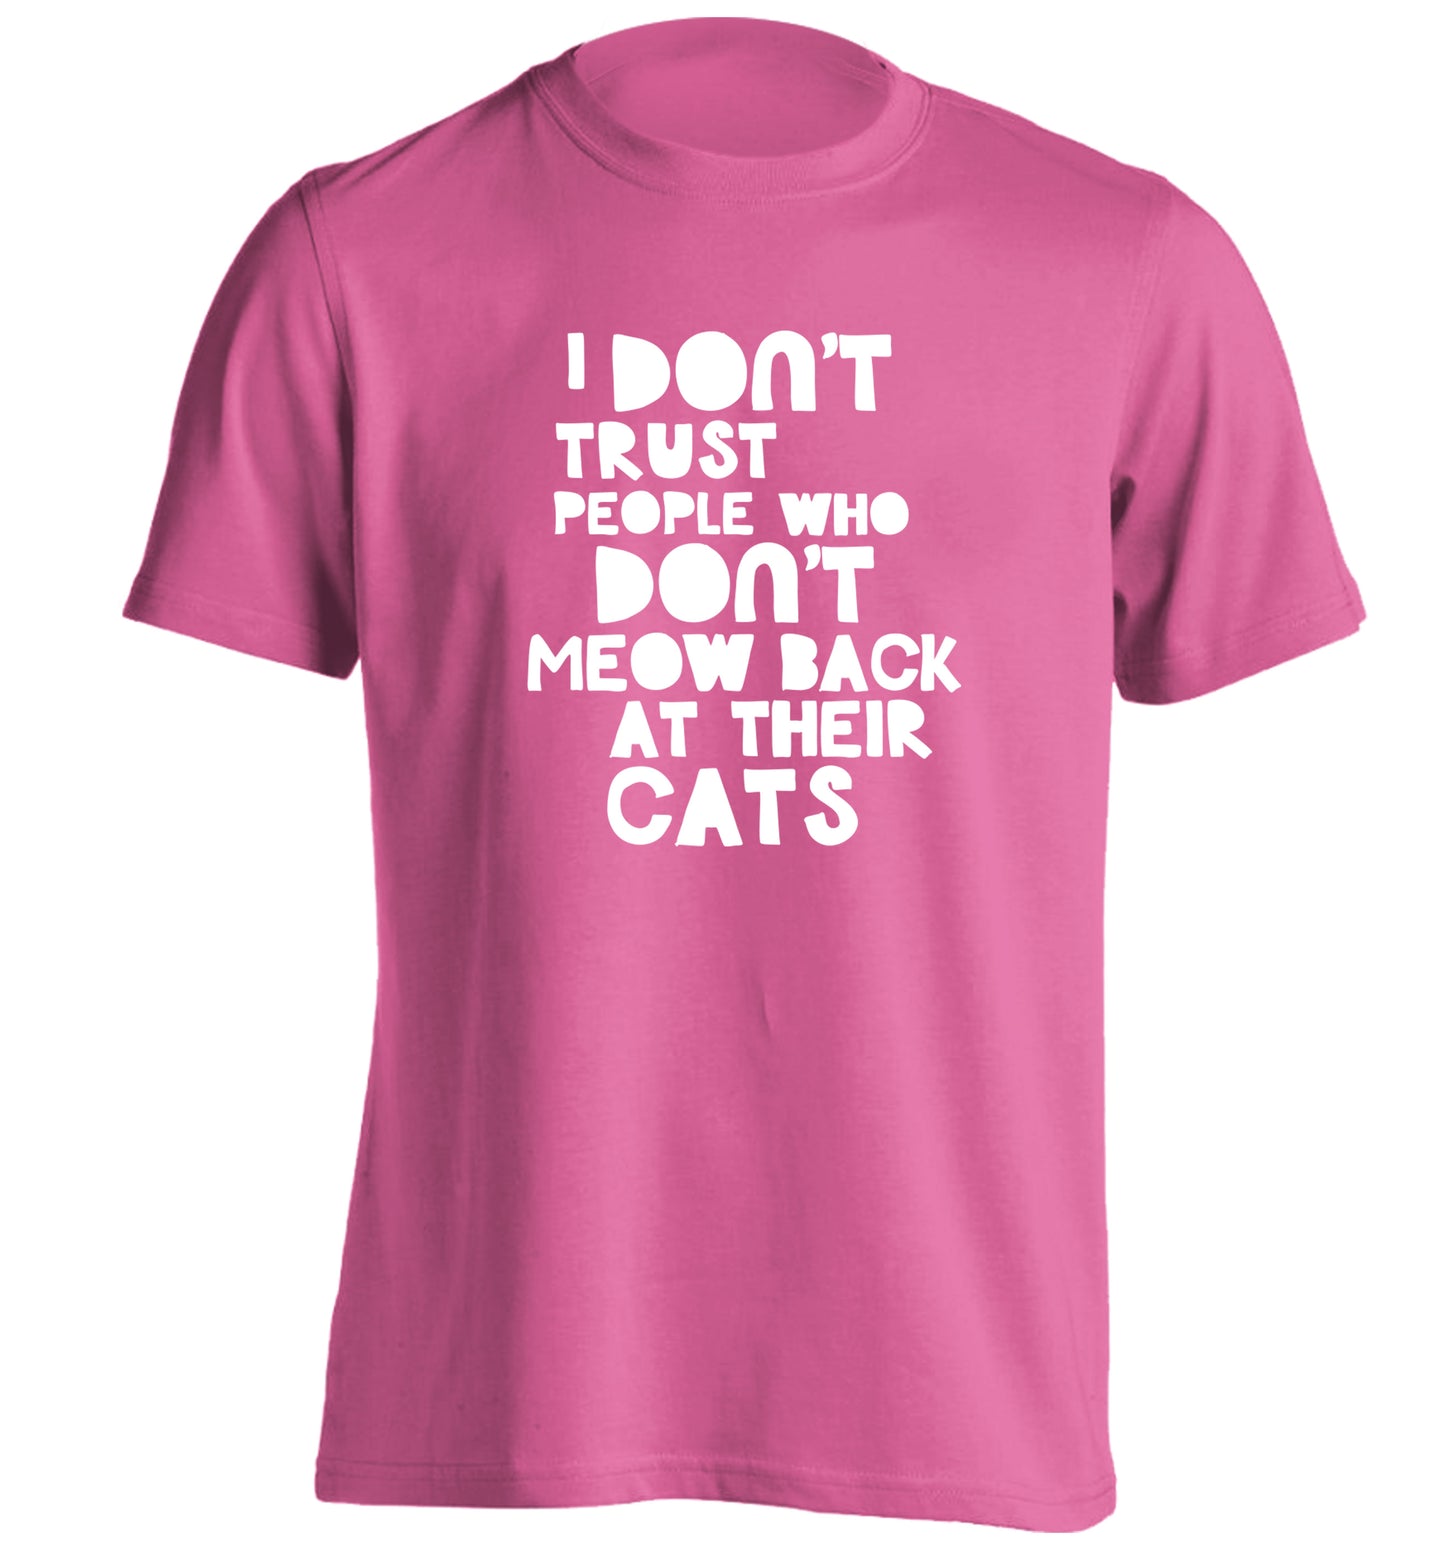 I don't trust people who don't meow back at their cats adults unisex pink Tshirt 2XL